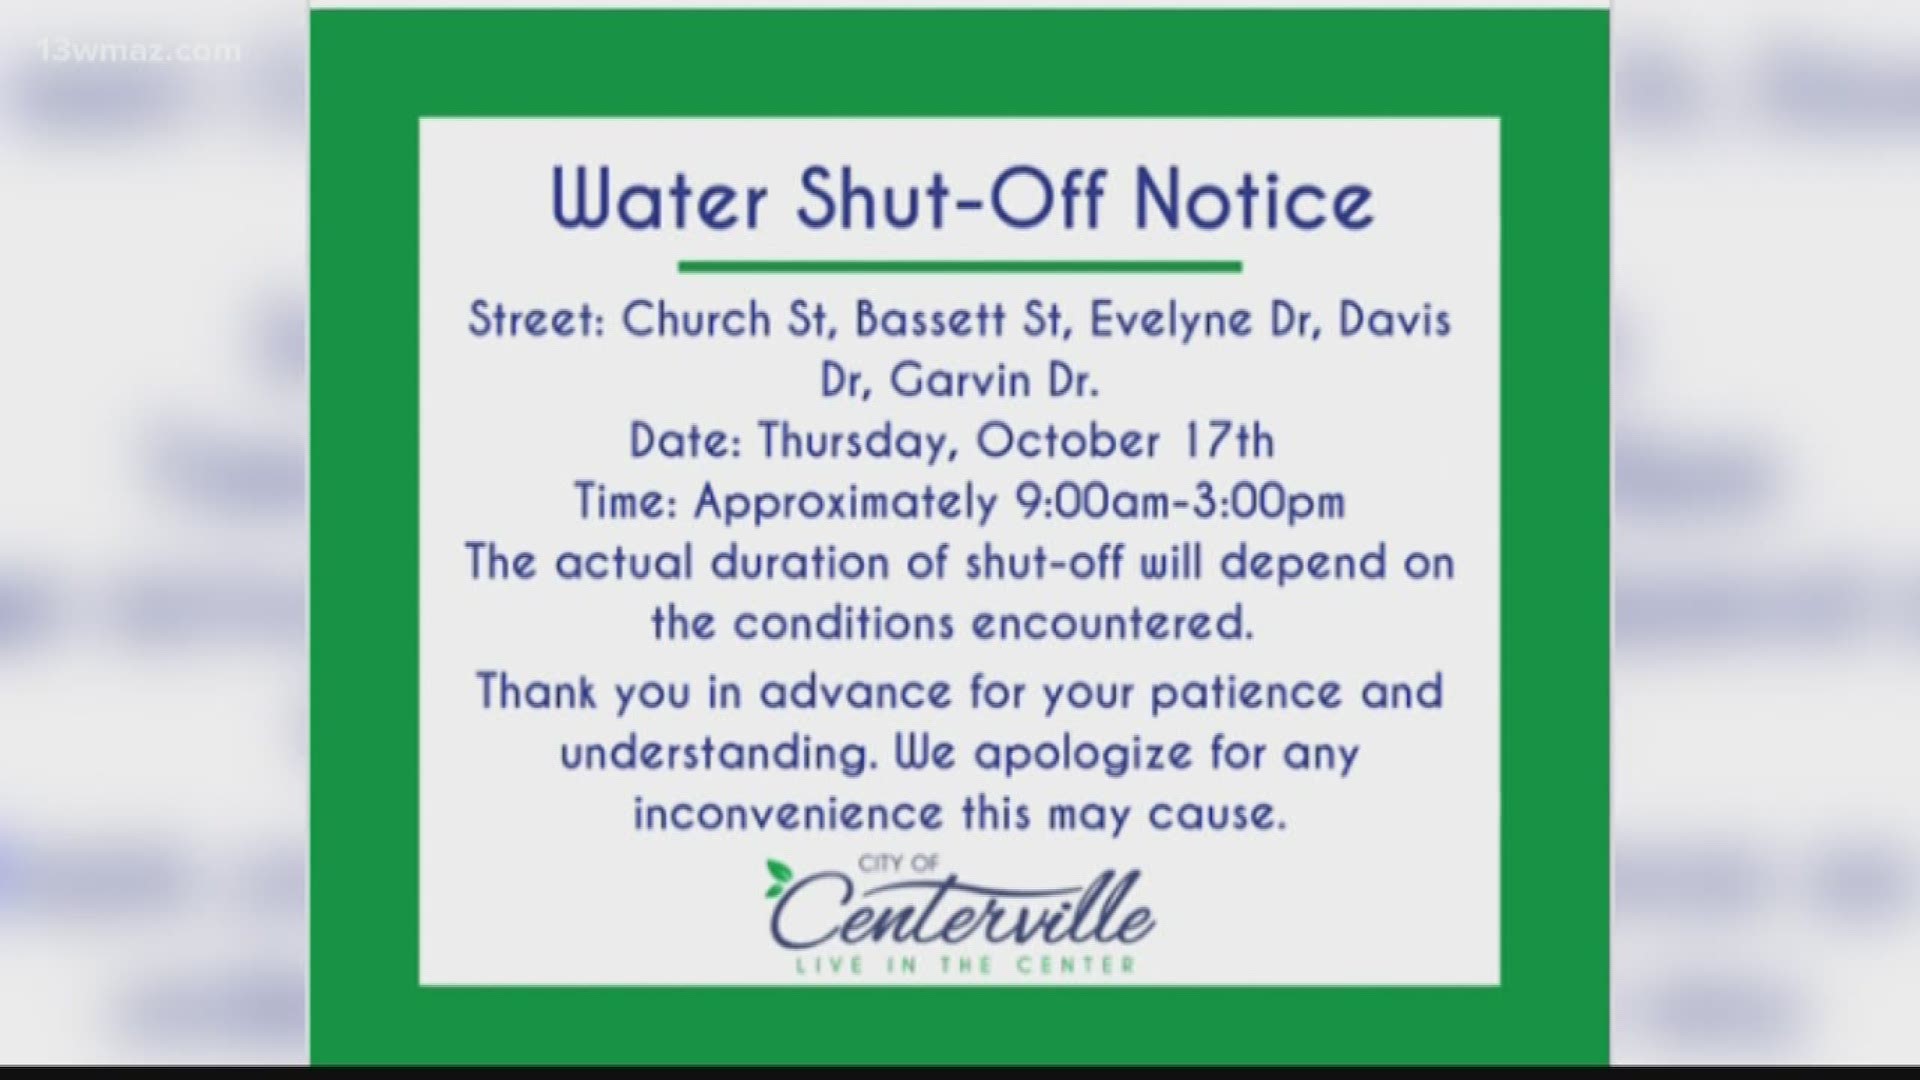 Centerville announced on their Facebook page that water will be shut off temporarily Thursday along five roads to put in a drain pipe.